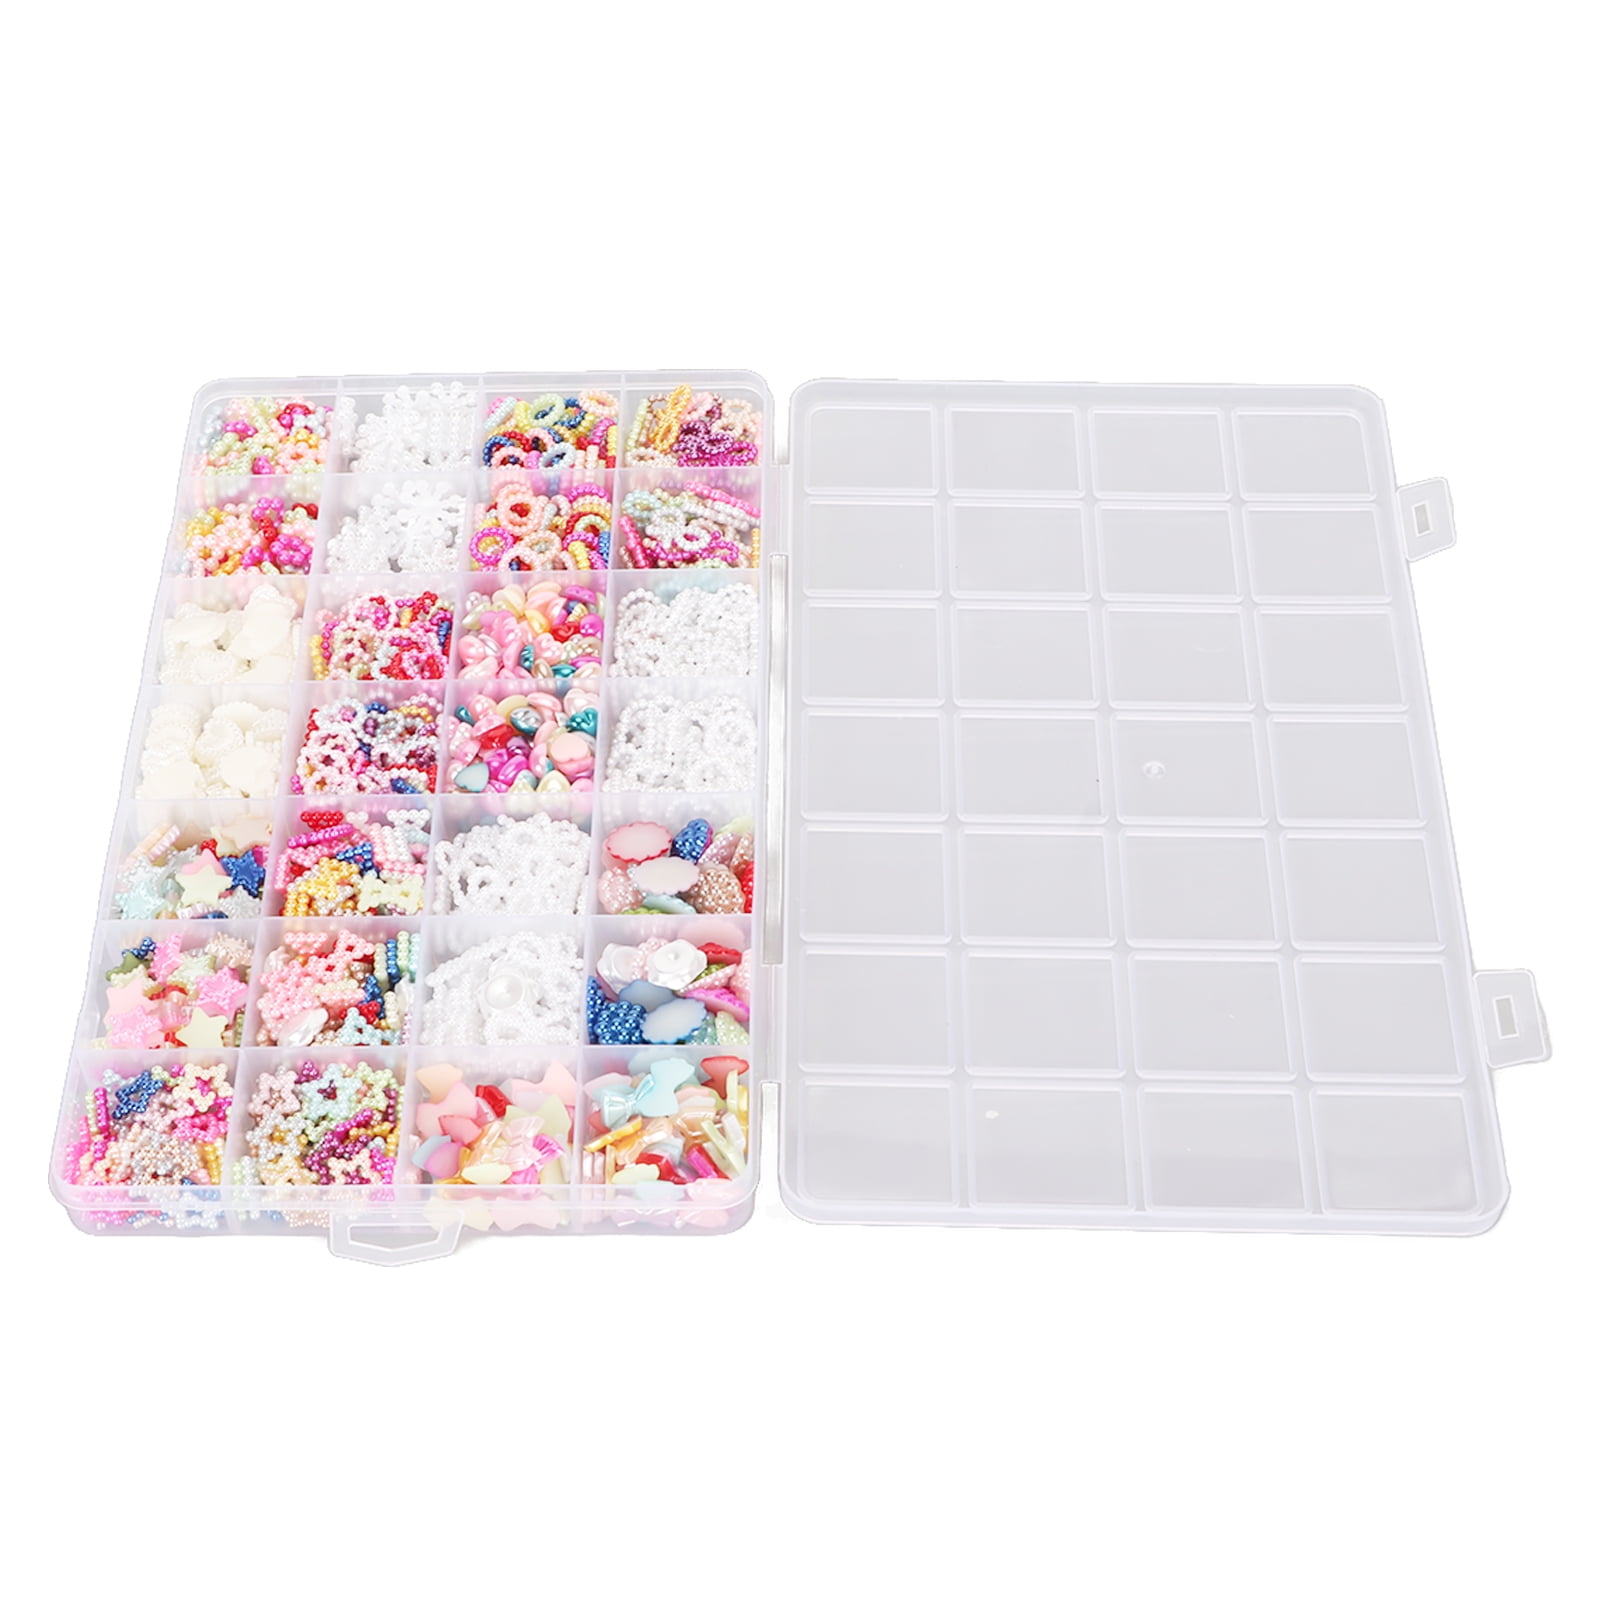 Hello Hobby Pony Beads, Candy-Colored, 500-Pack, Boys and Girls, Child,  Ages 6+ 